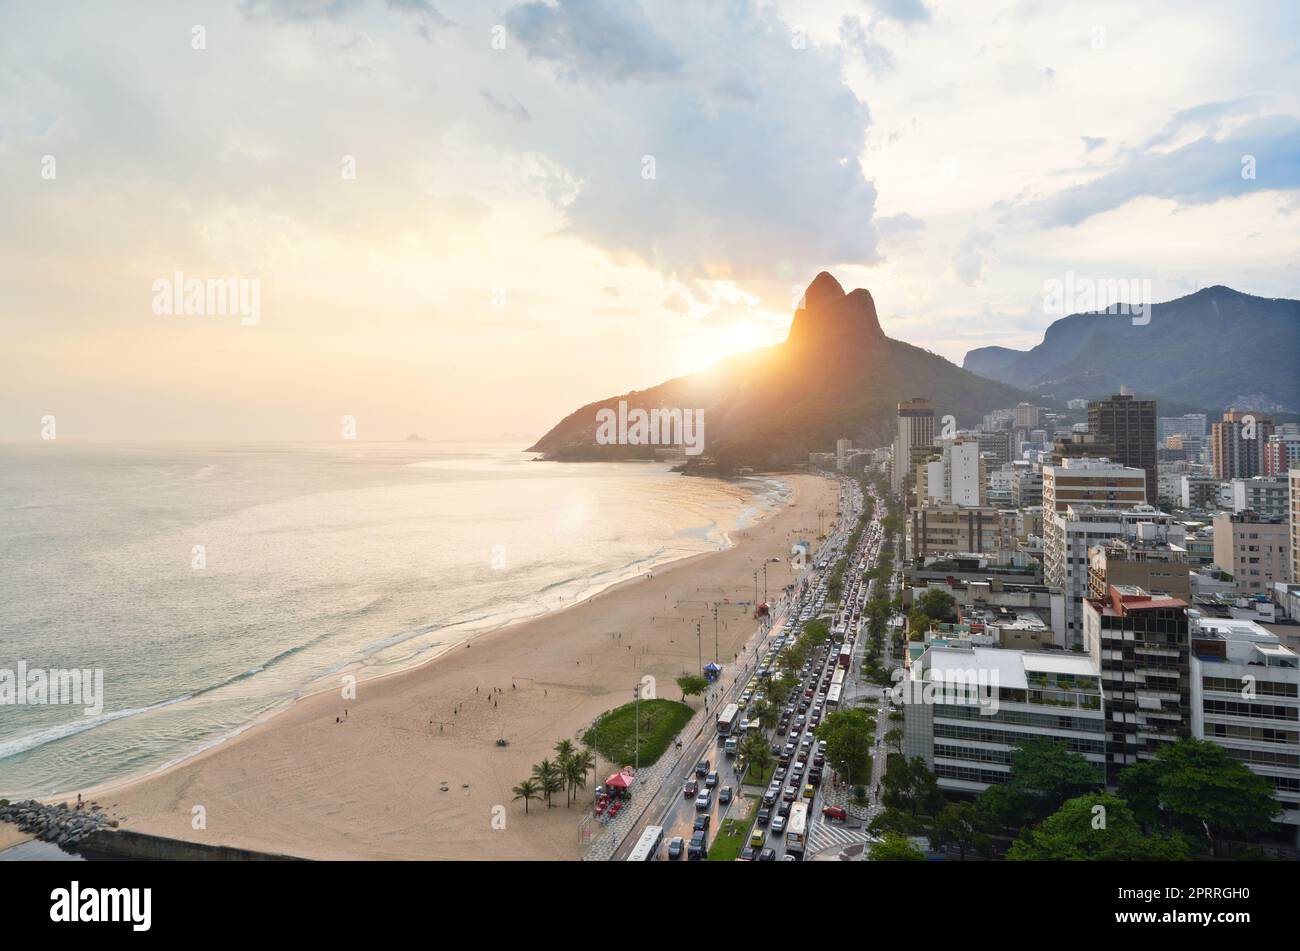 Take a vacation in paradise. An aerial view of the beaches in Rio de Janeiro, Brazil. Stock Photo